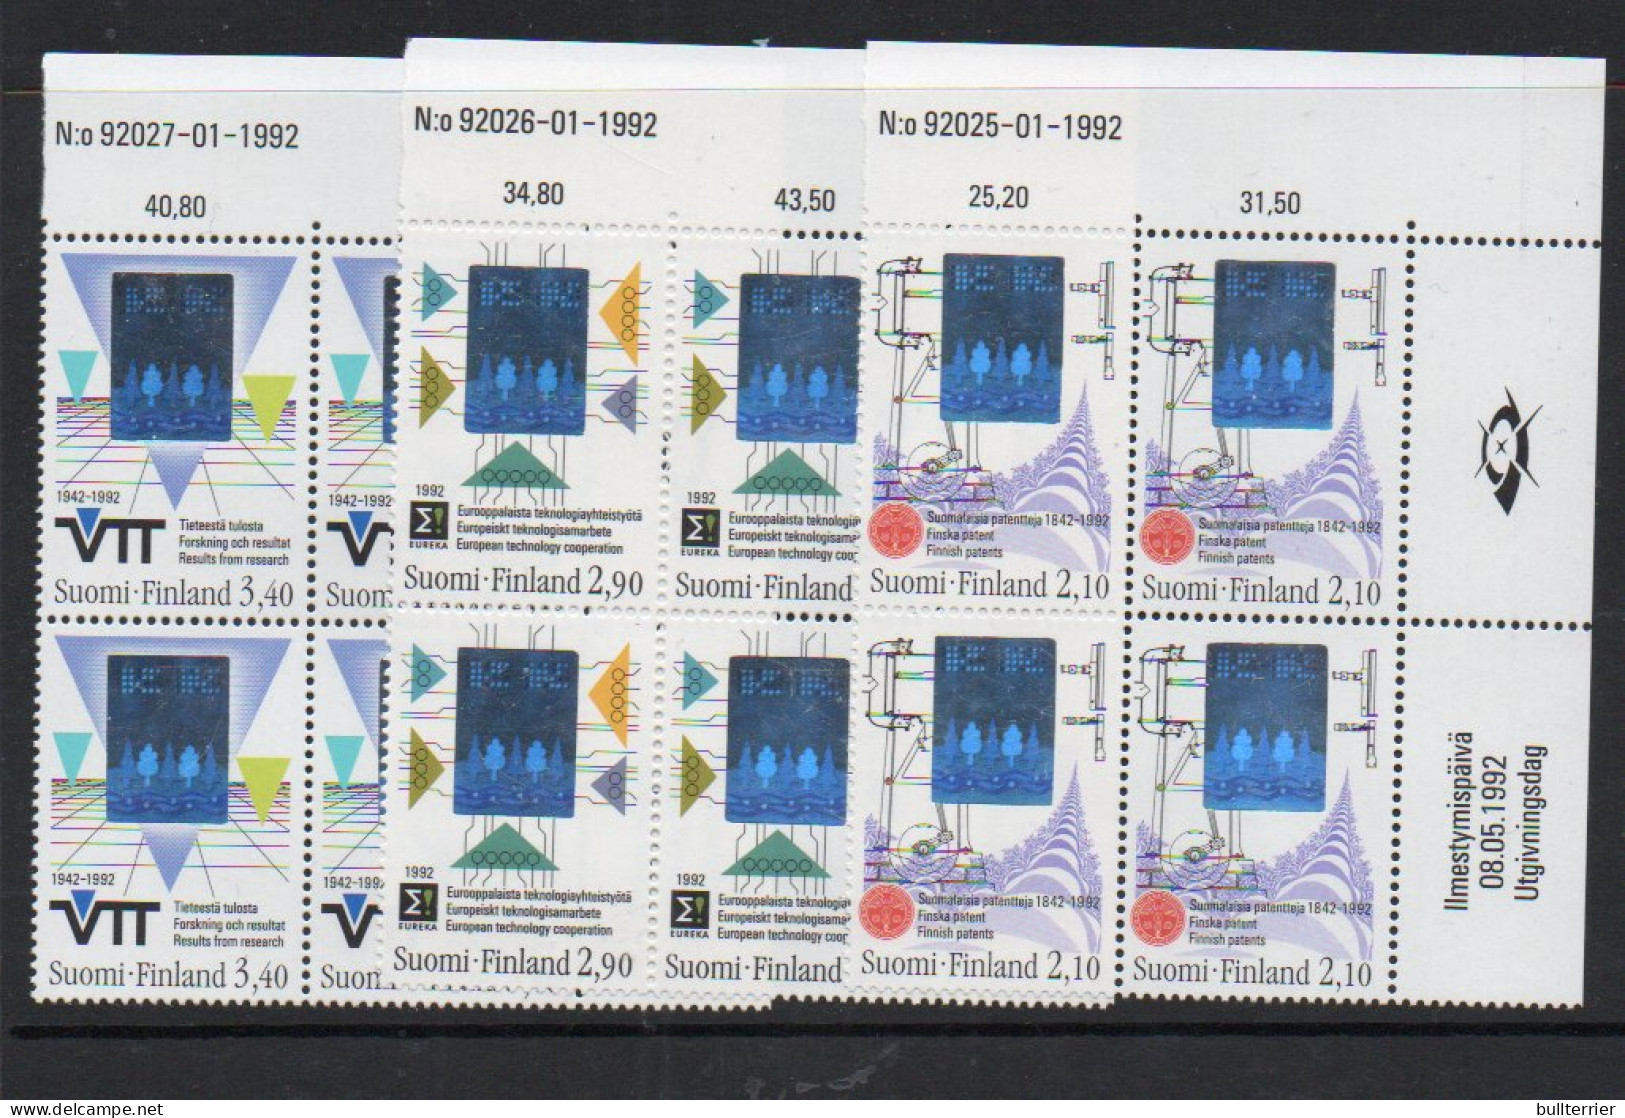 HOLOGRAMS - FINLAND - 1992 -TECHNOLOGY HOLOGRAMS SET OF 3 IN BLOCKS OF 4 MINT NEVER HINGED, SG CAT £35 - Hologrammes